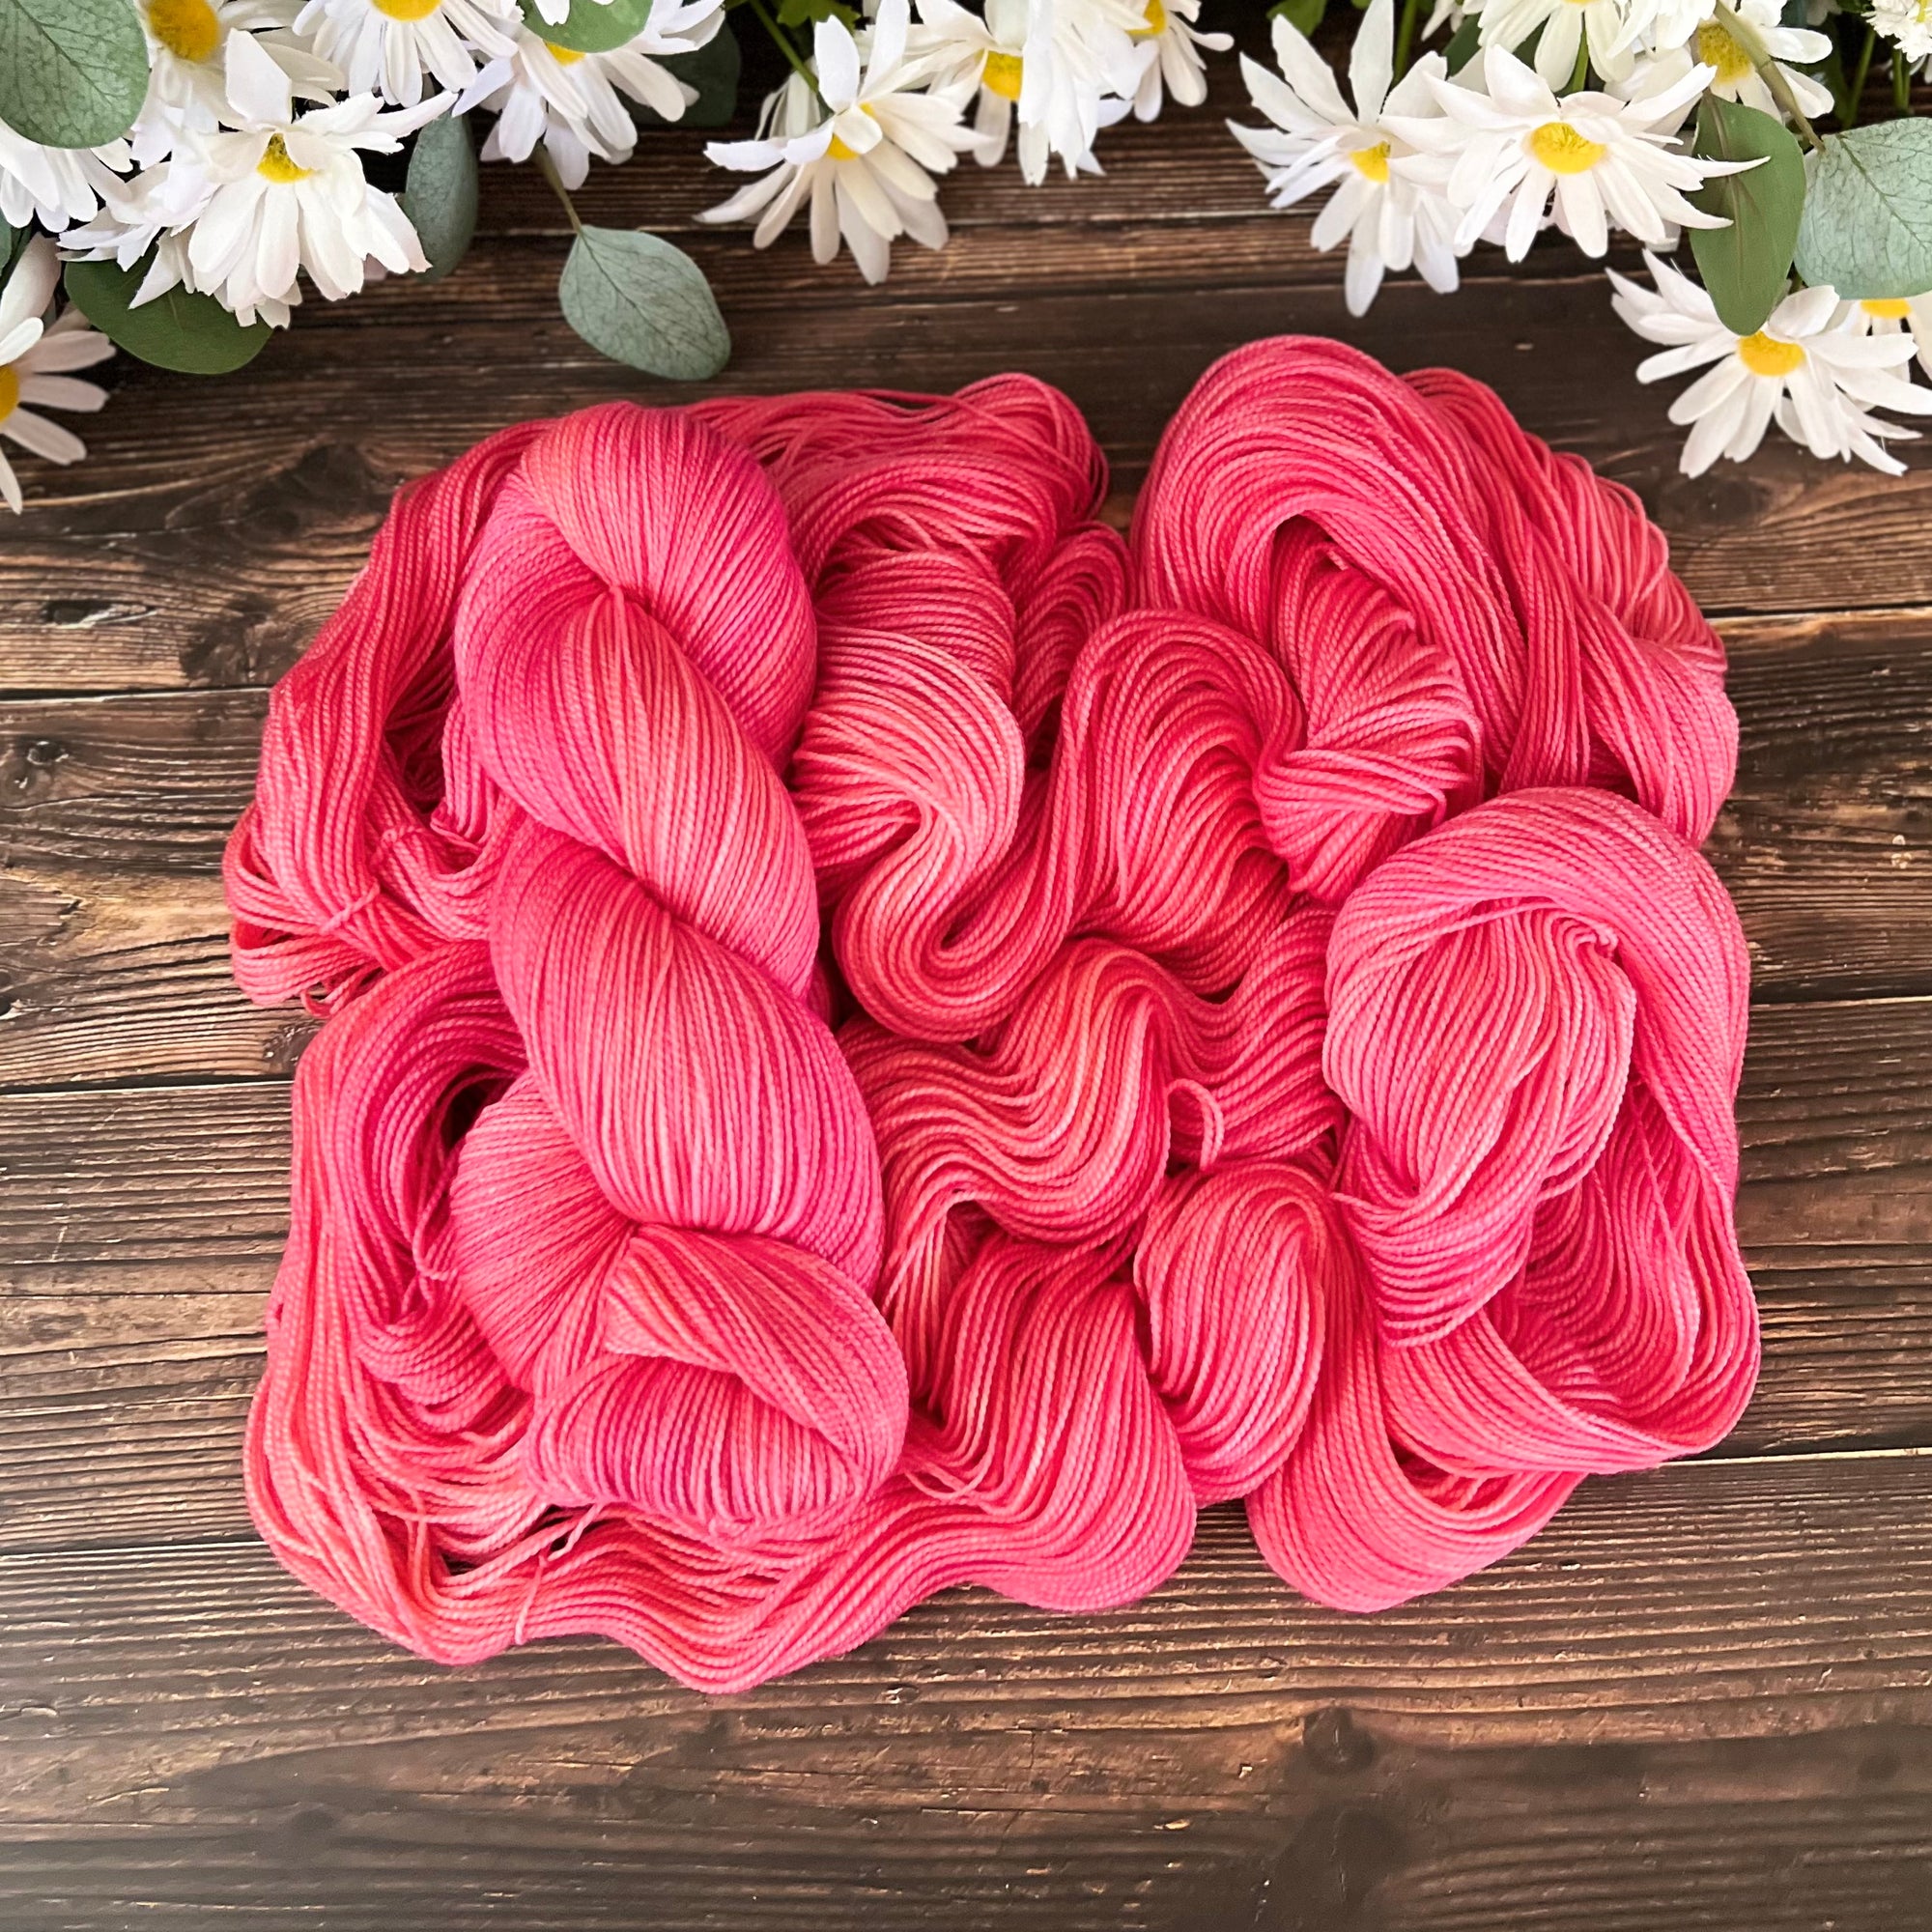 "Sunkissed" Hand-dyed Yarn